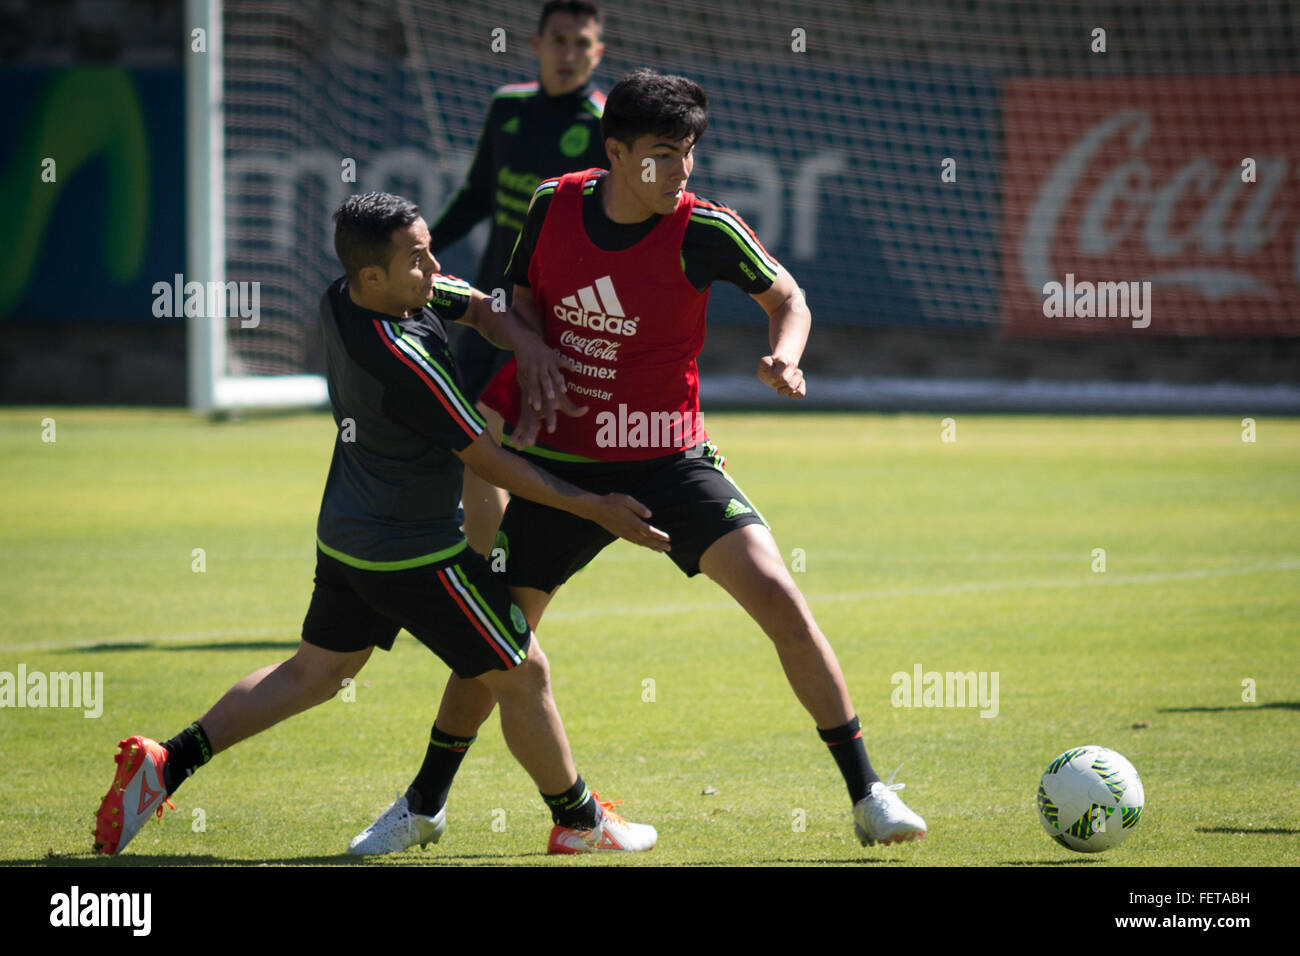 Mexico City, Mexico. 8th Feb, 2016. Mexico's players Luis Montes (L) and Erick Gutierrez participate in a training session in Mexico City, capital of Mexico, on Feb. 8, 2016. © Pedro Mera/Xinhua/Alamy Live News Stock Photo